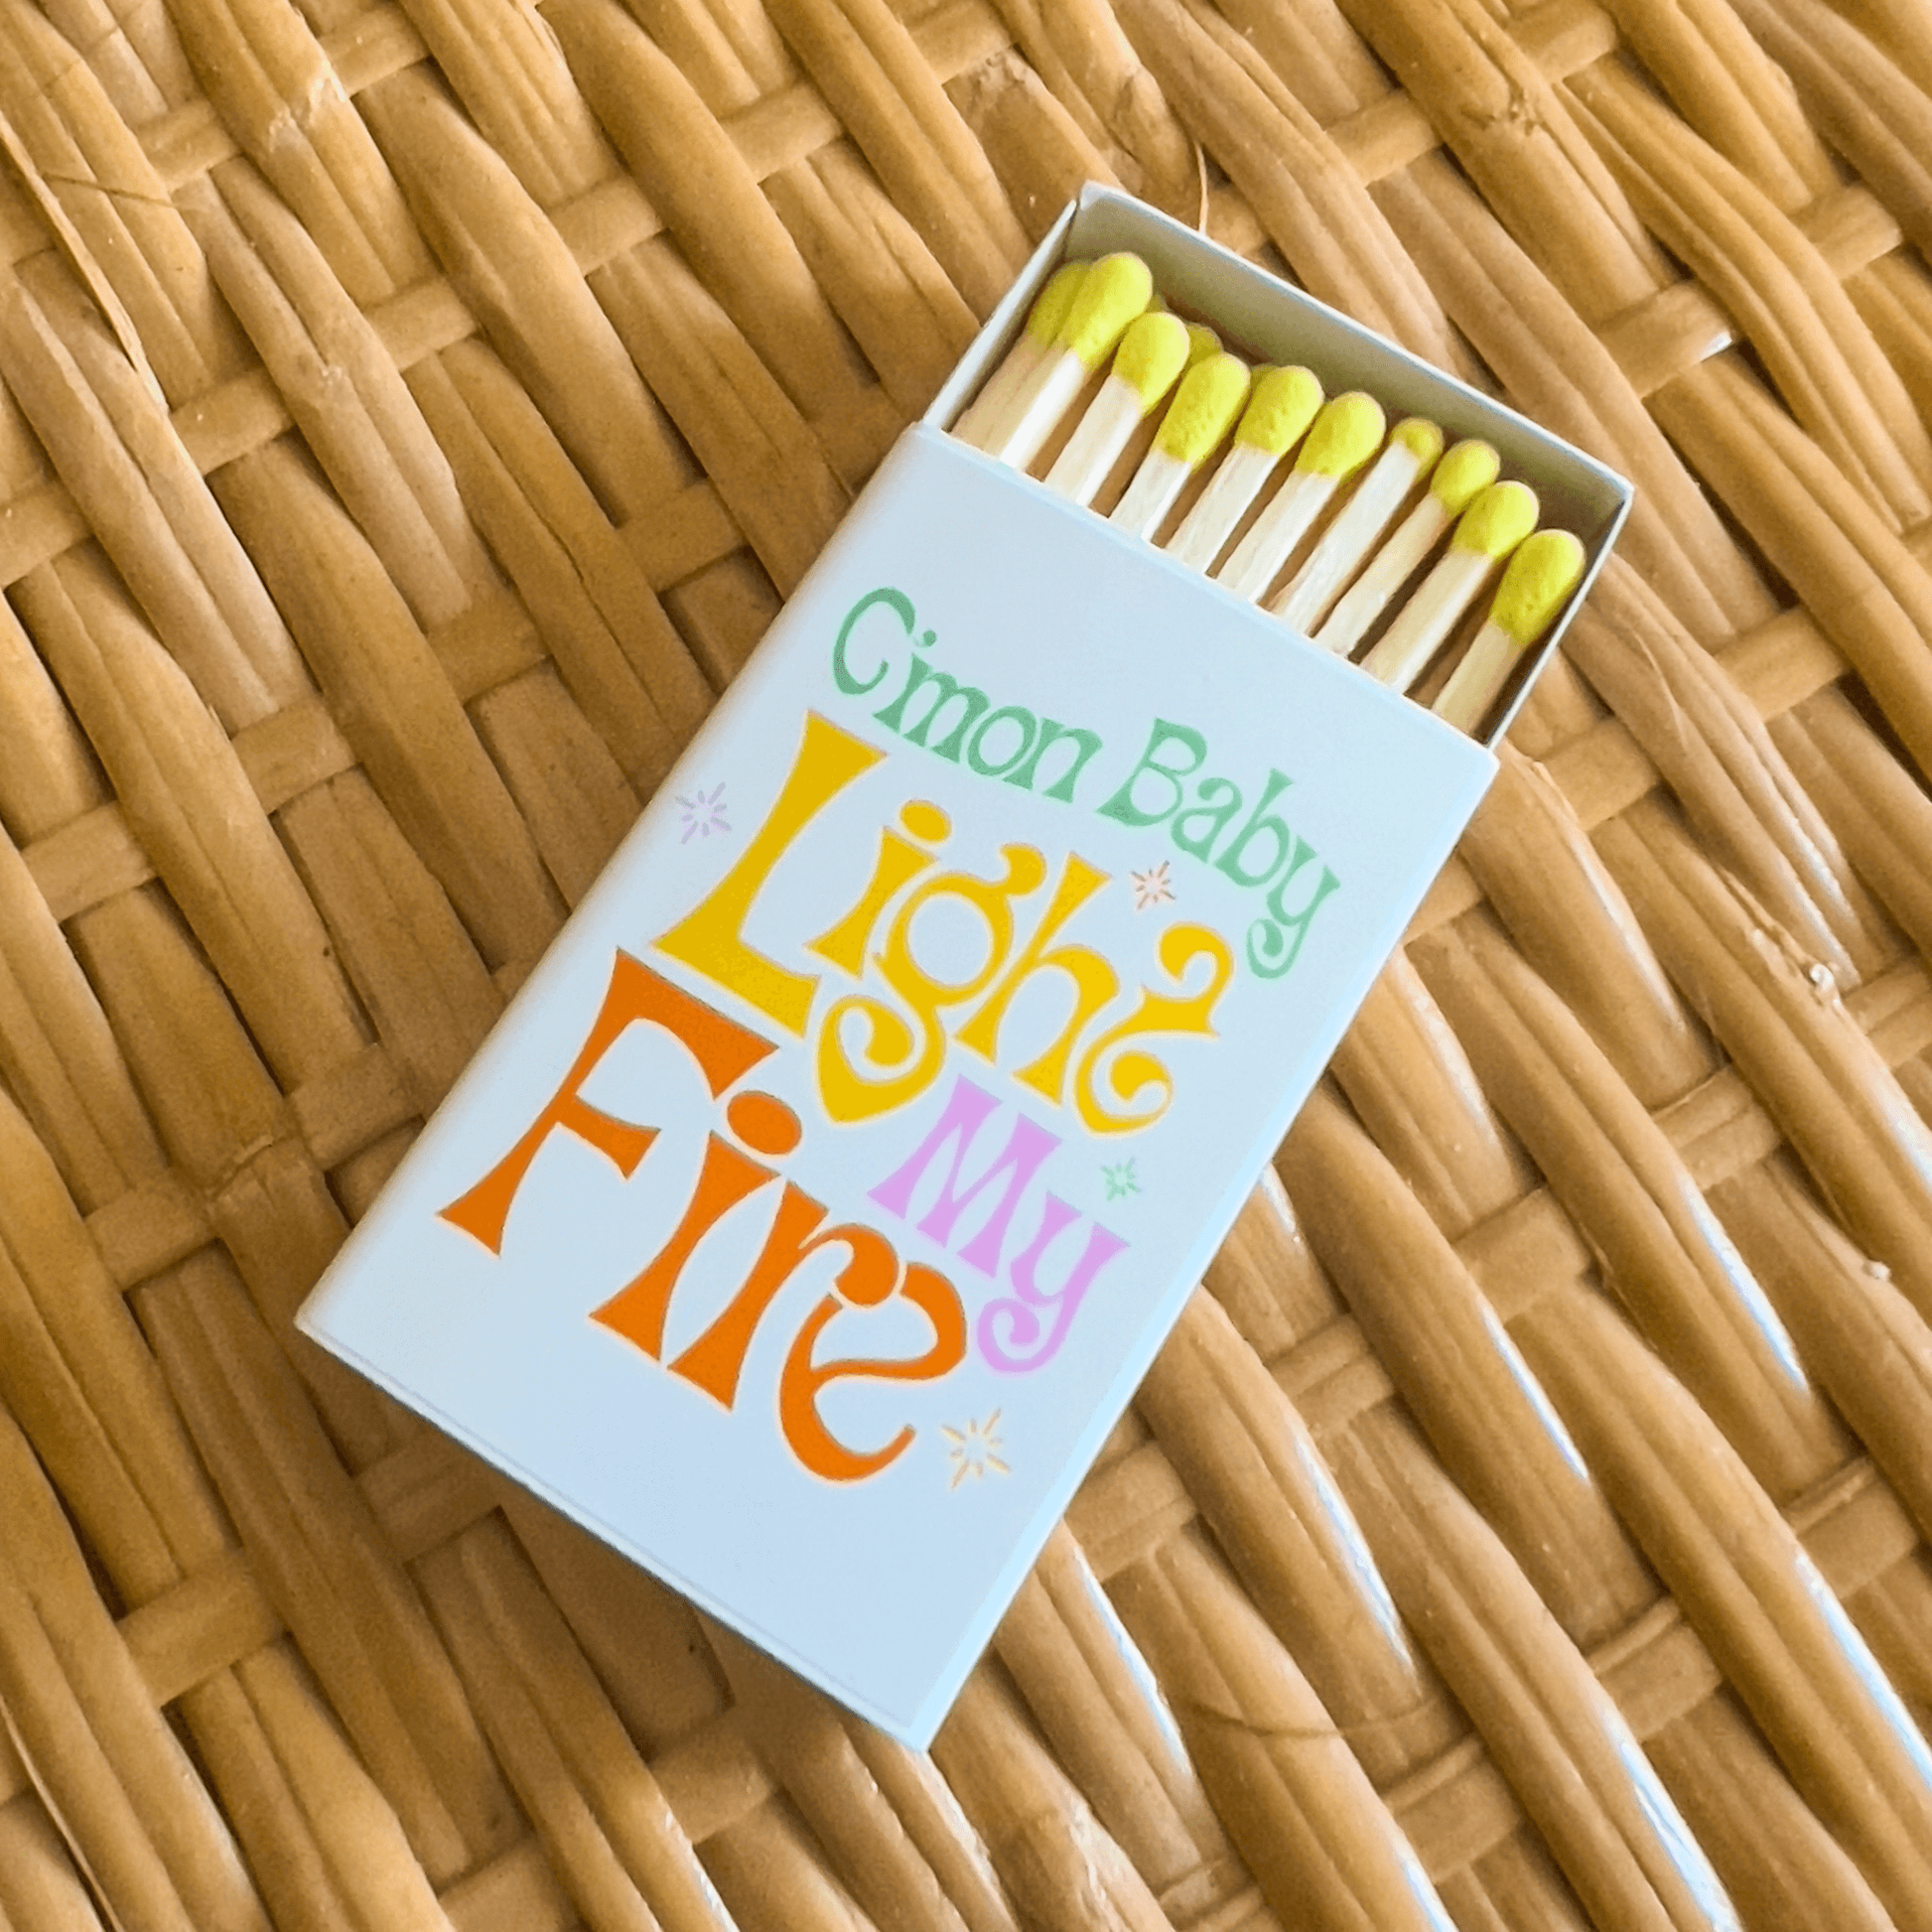 Matchbox on wicker table with come on baby light my fire text graphic. Yellow tipped matches